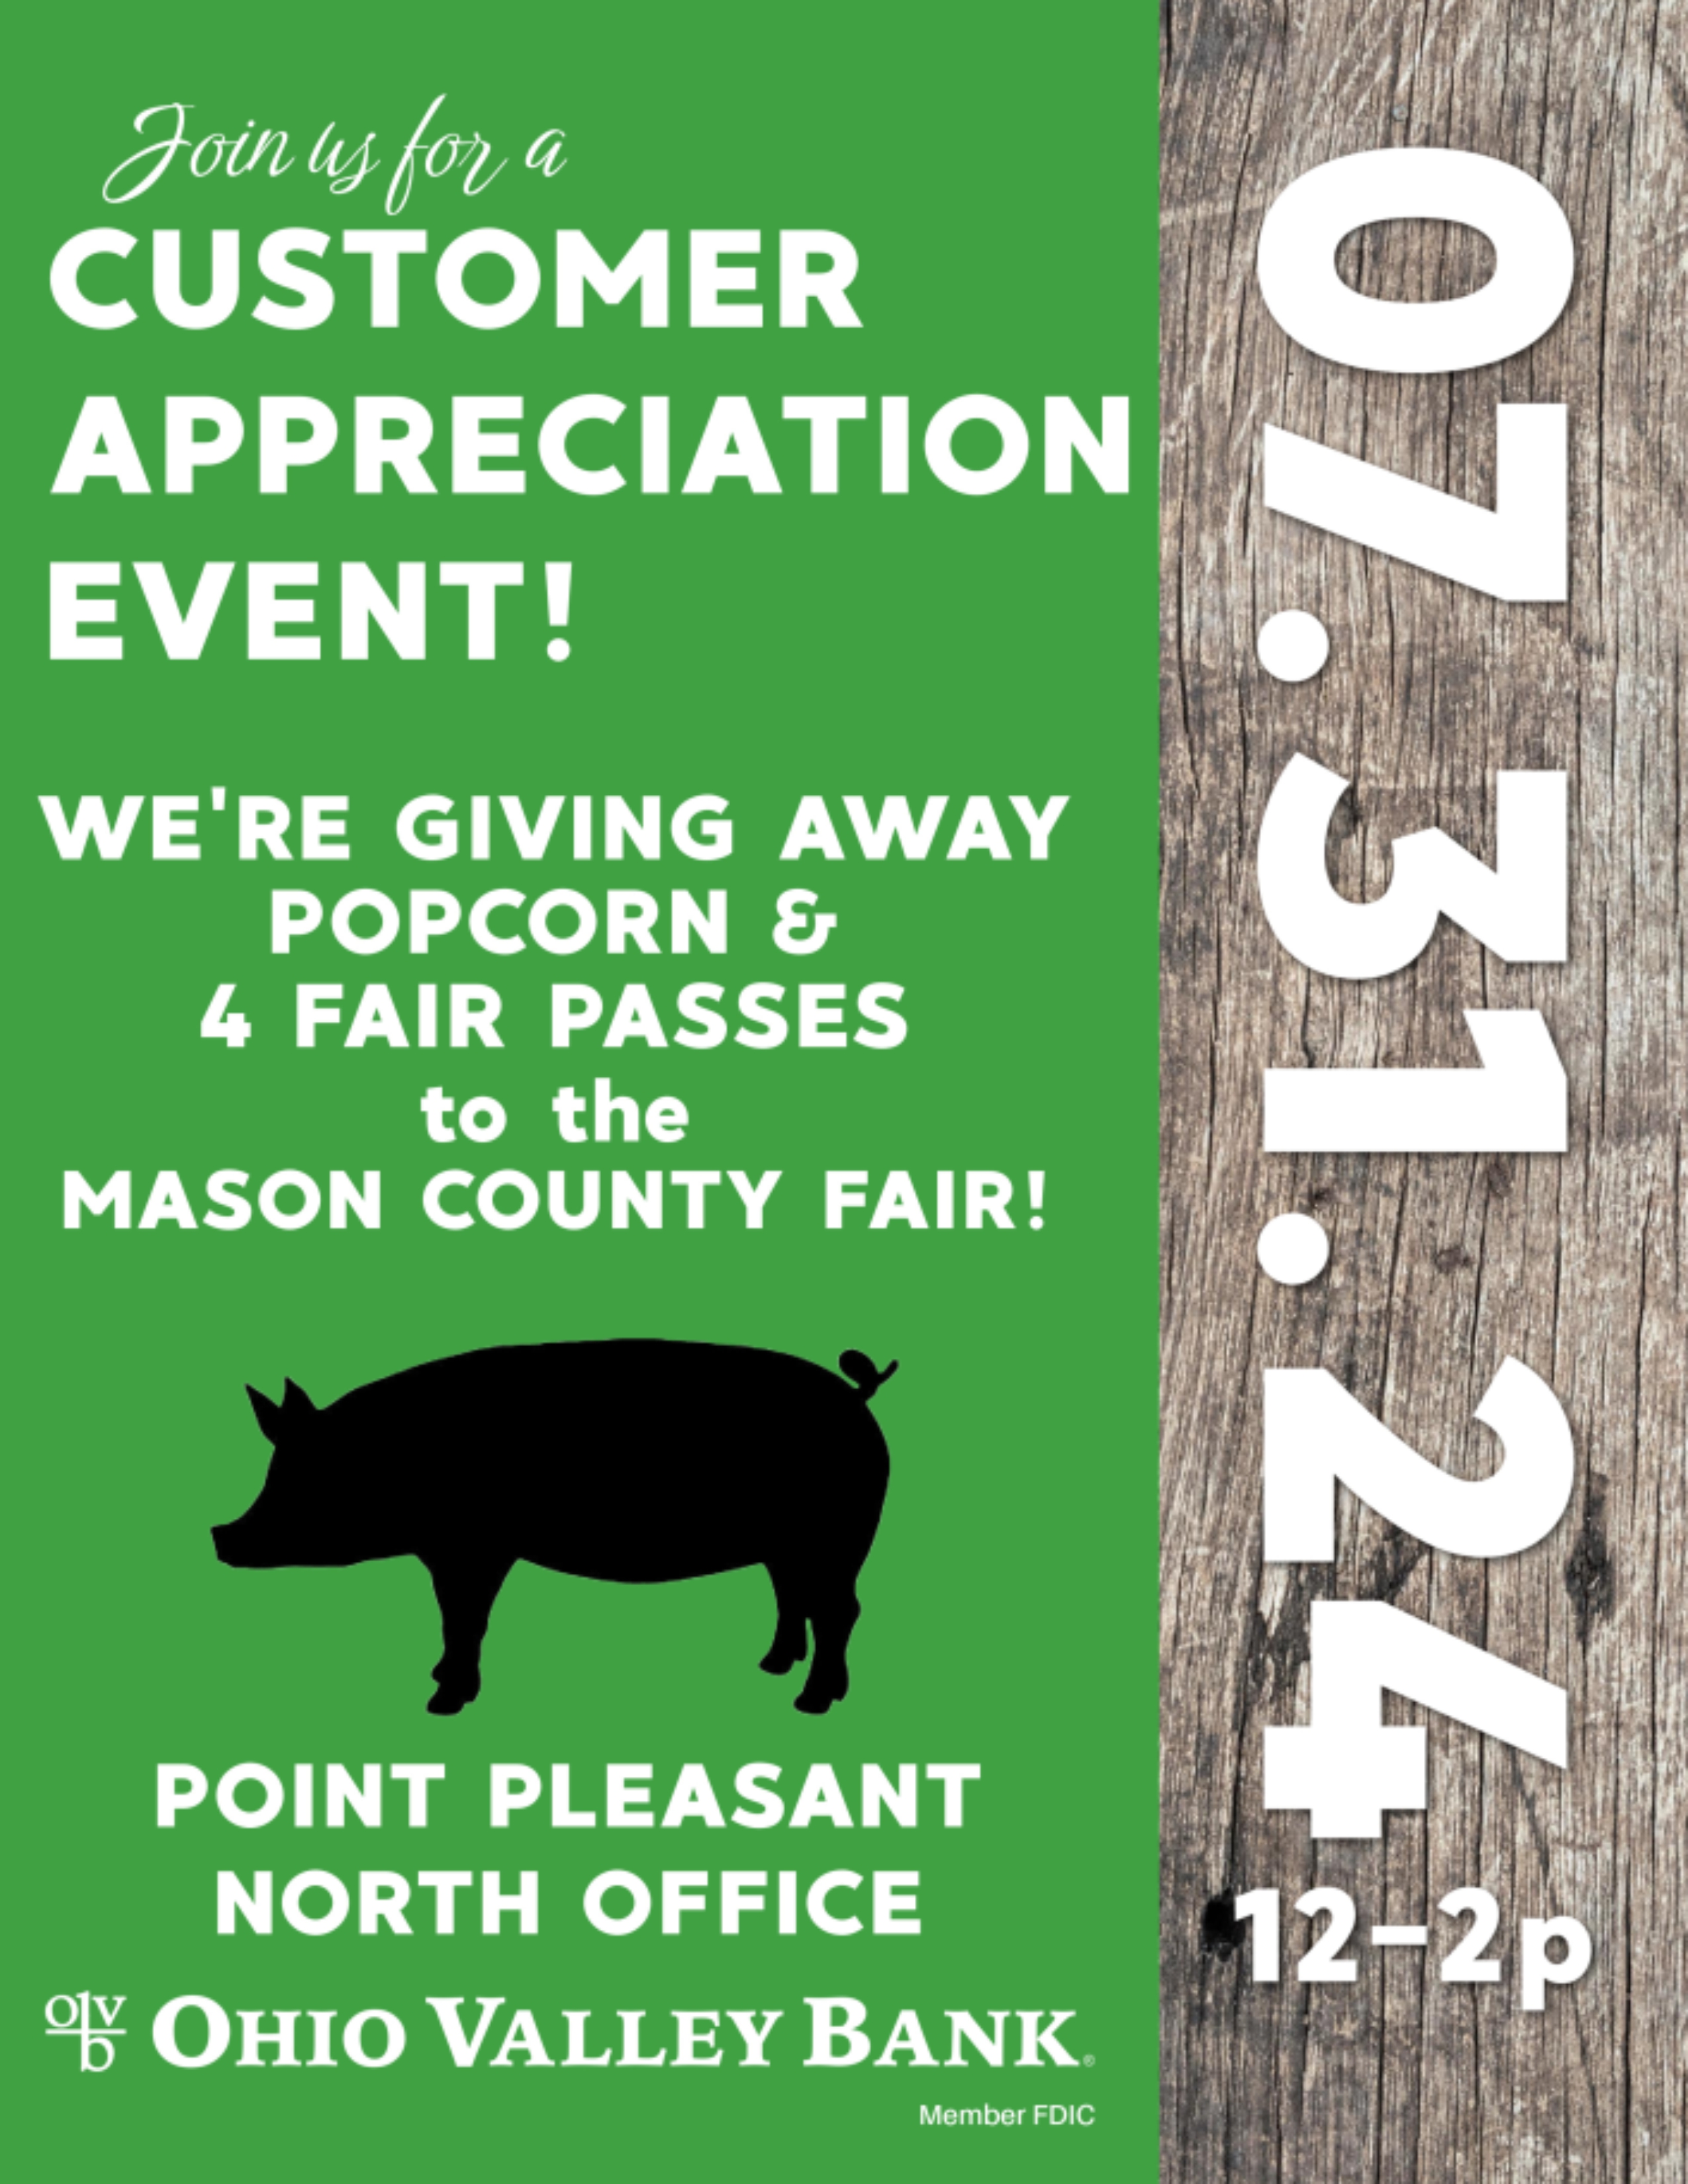 the point pleasant north office is holding a customer appreciation event on July 31st 2024. Between the hours of noon and two p.m.